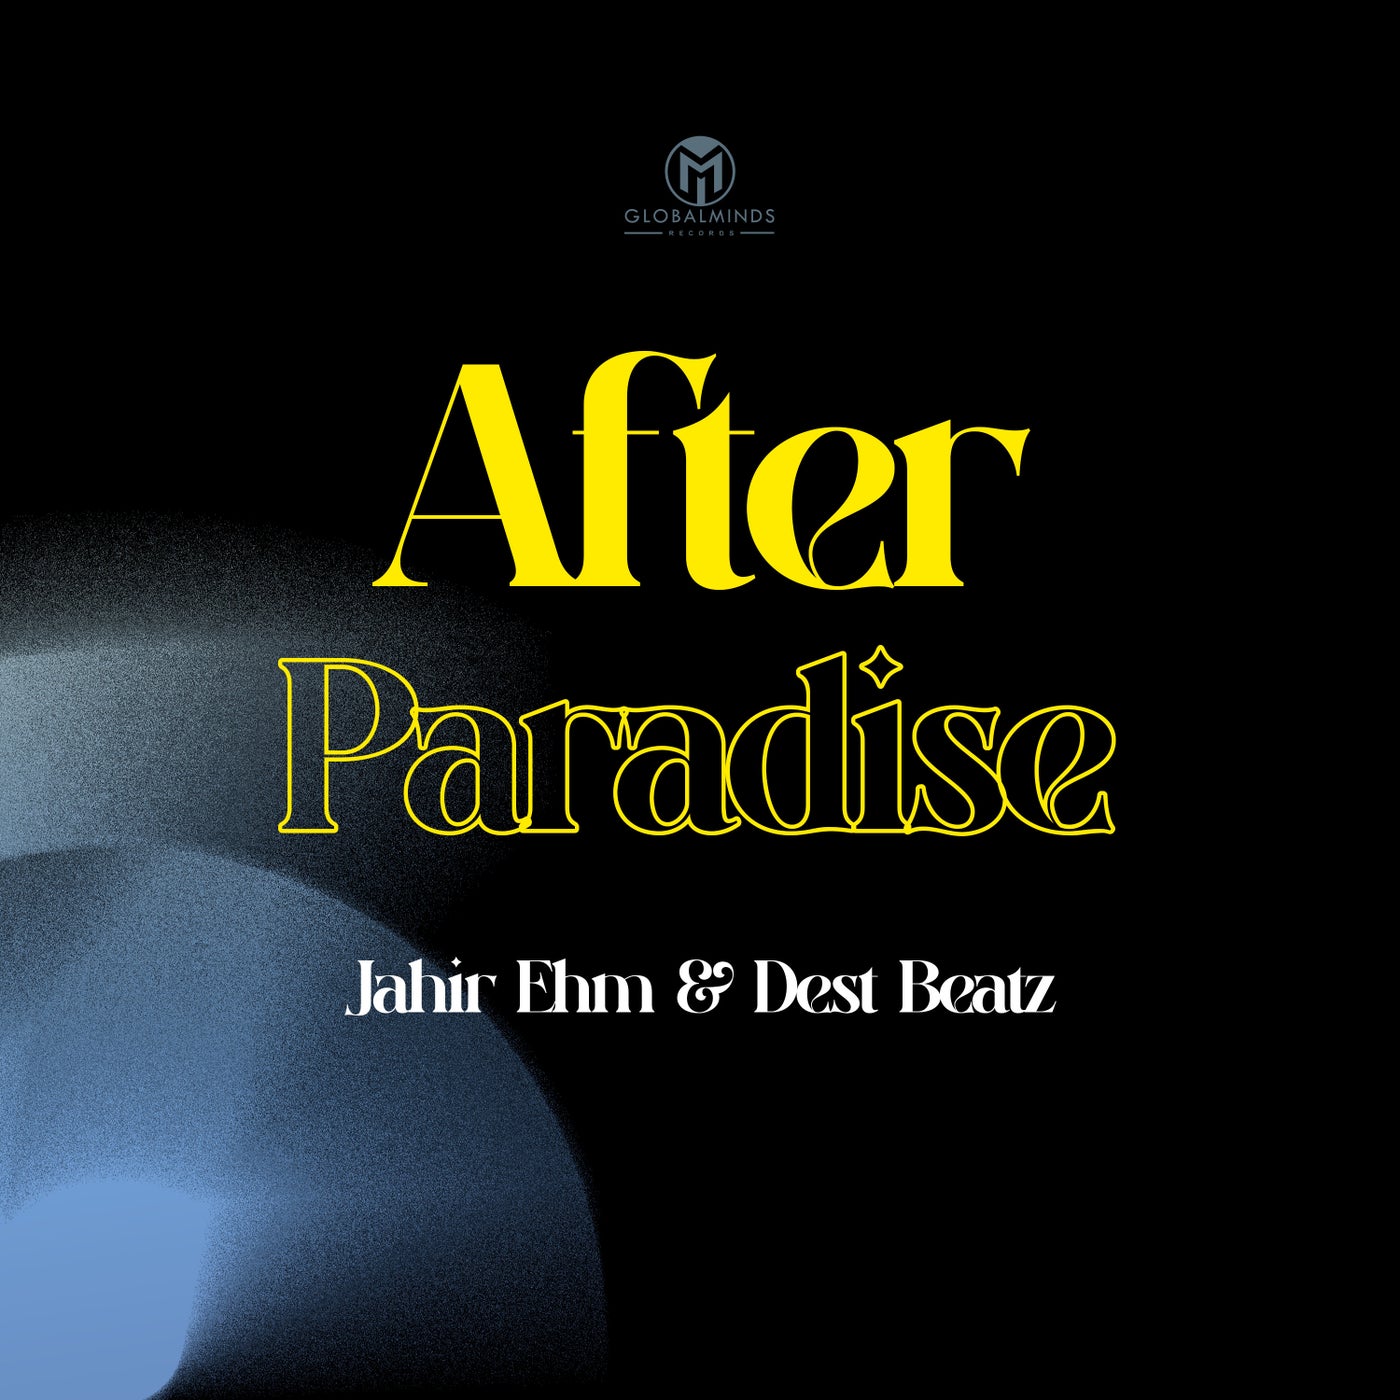 After Paradise